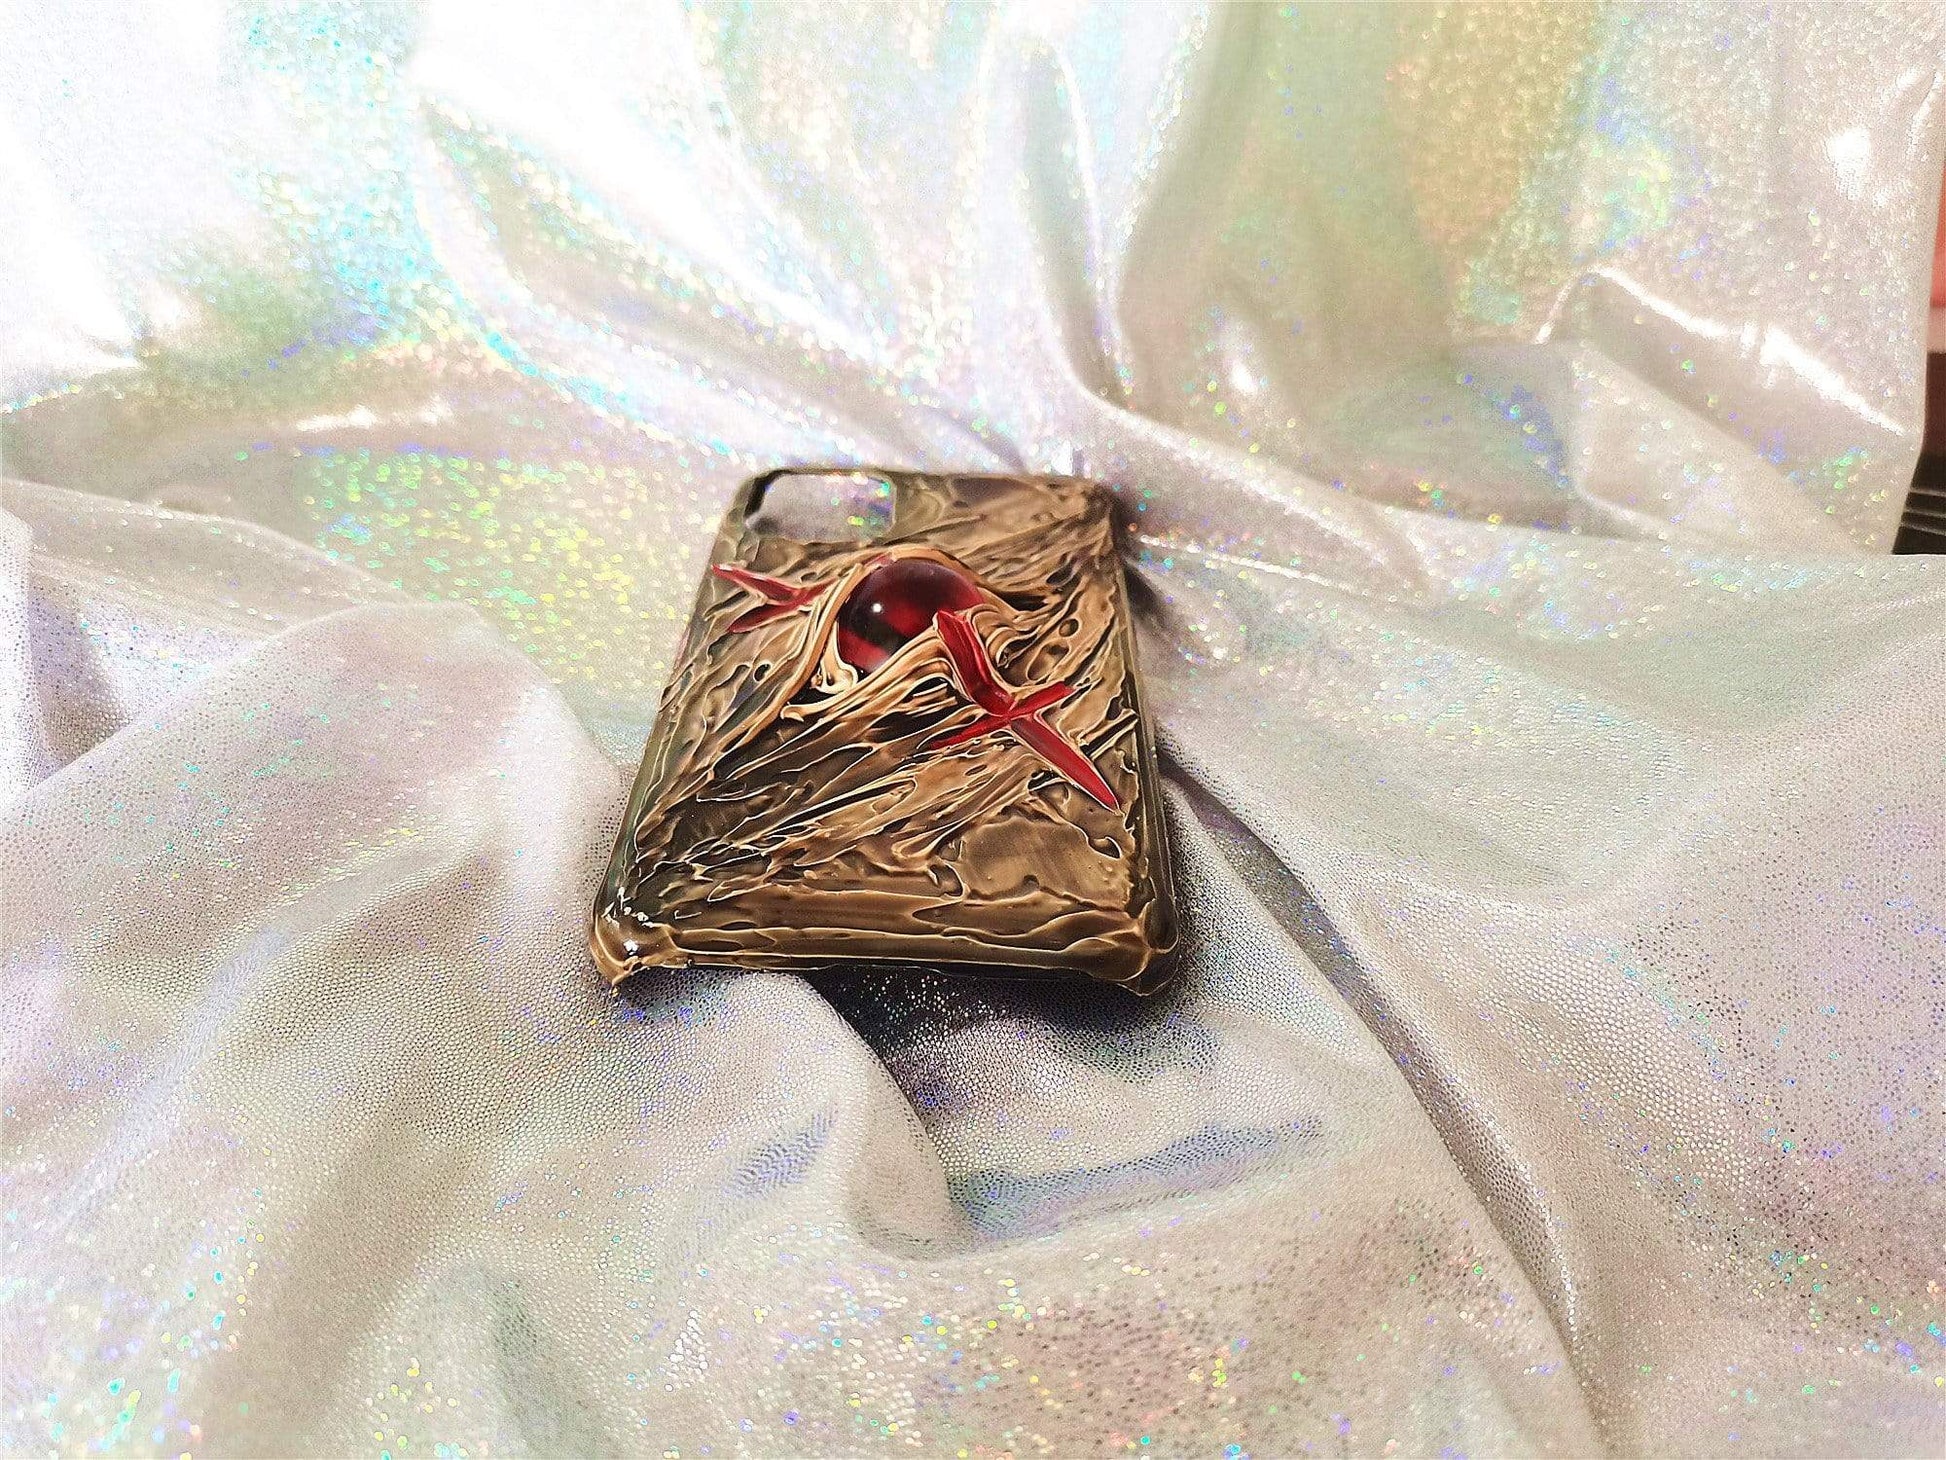 The Scarred Dragon Designer iPhone Case For All iPhone Models - techypopcom